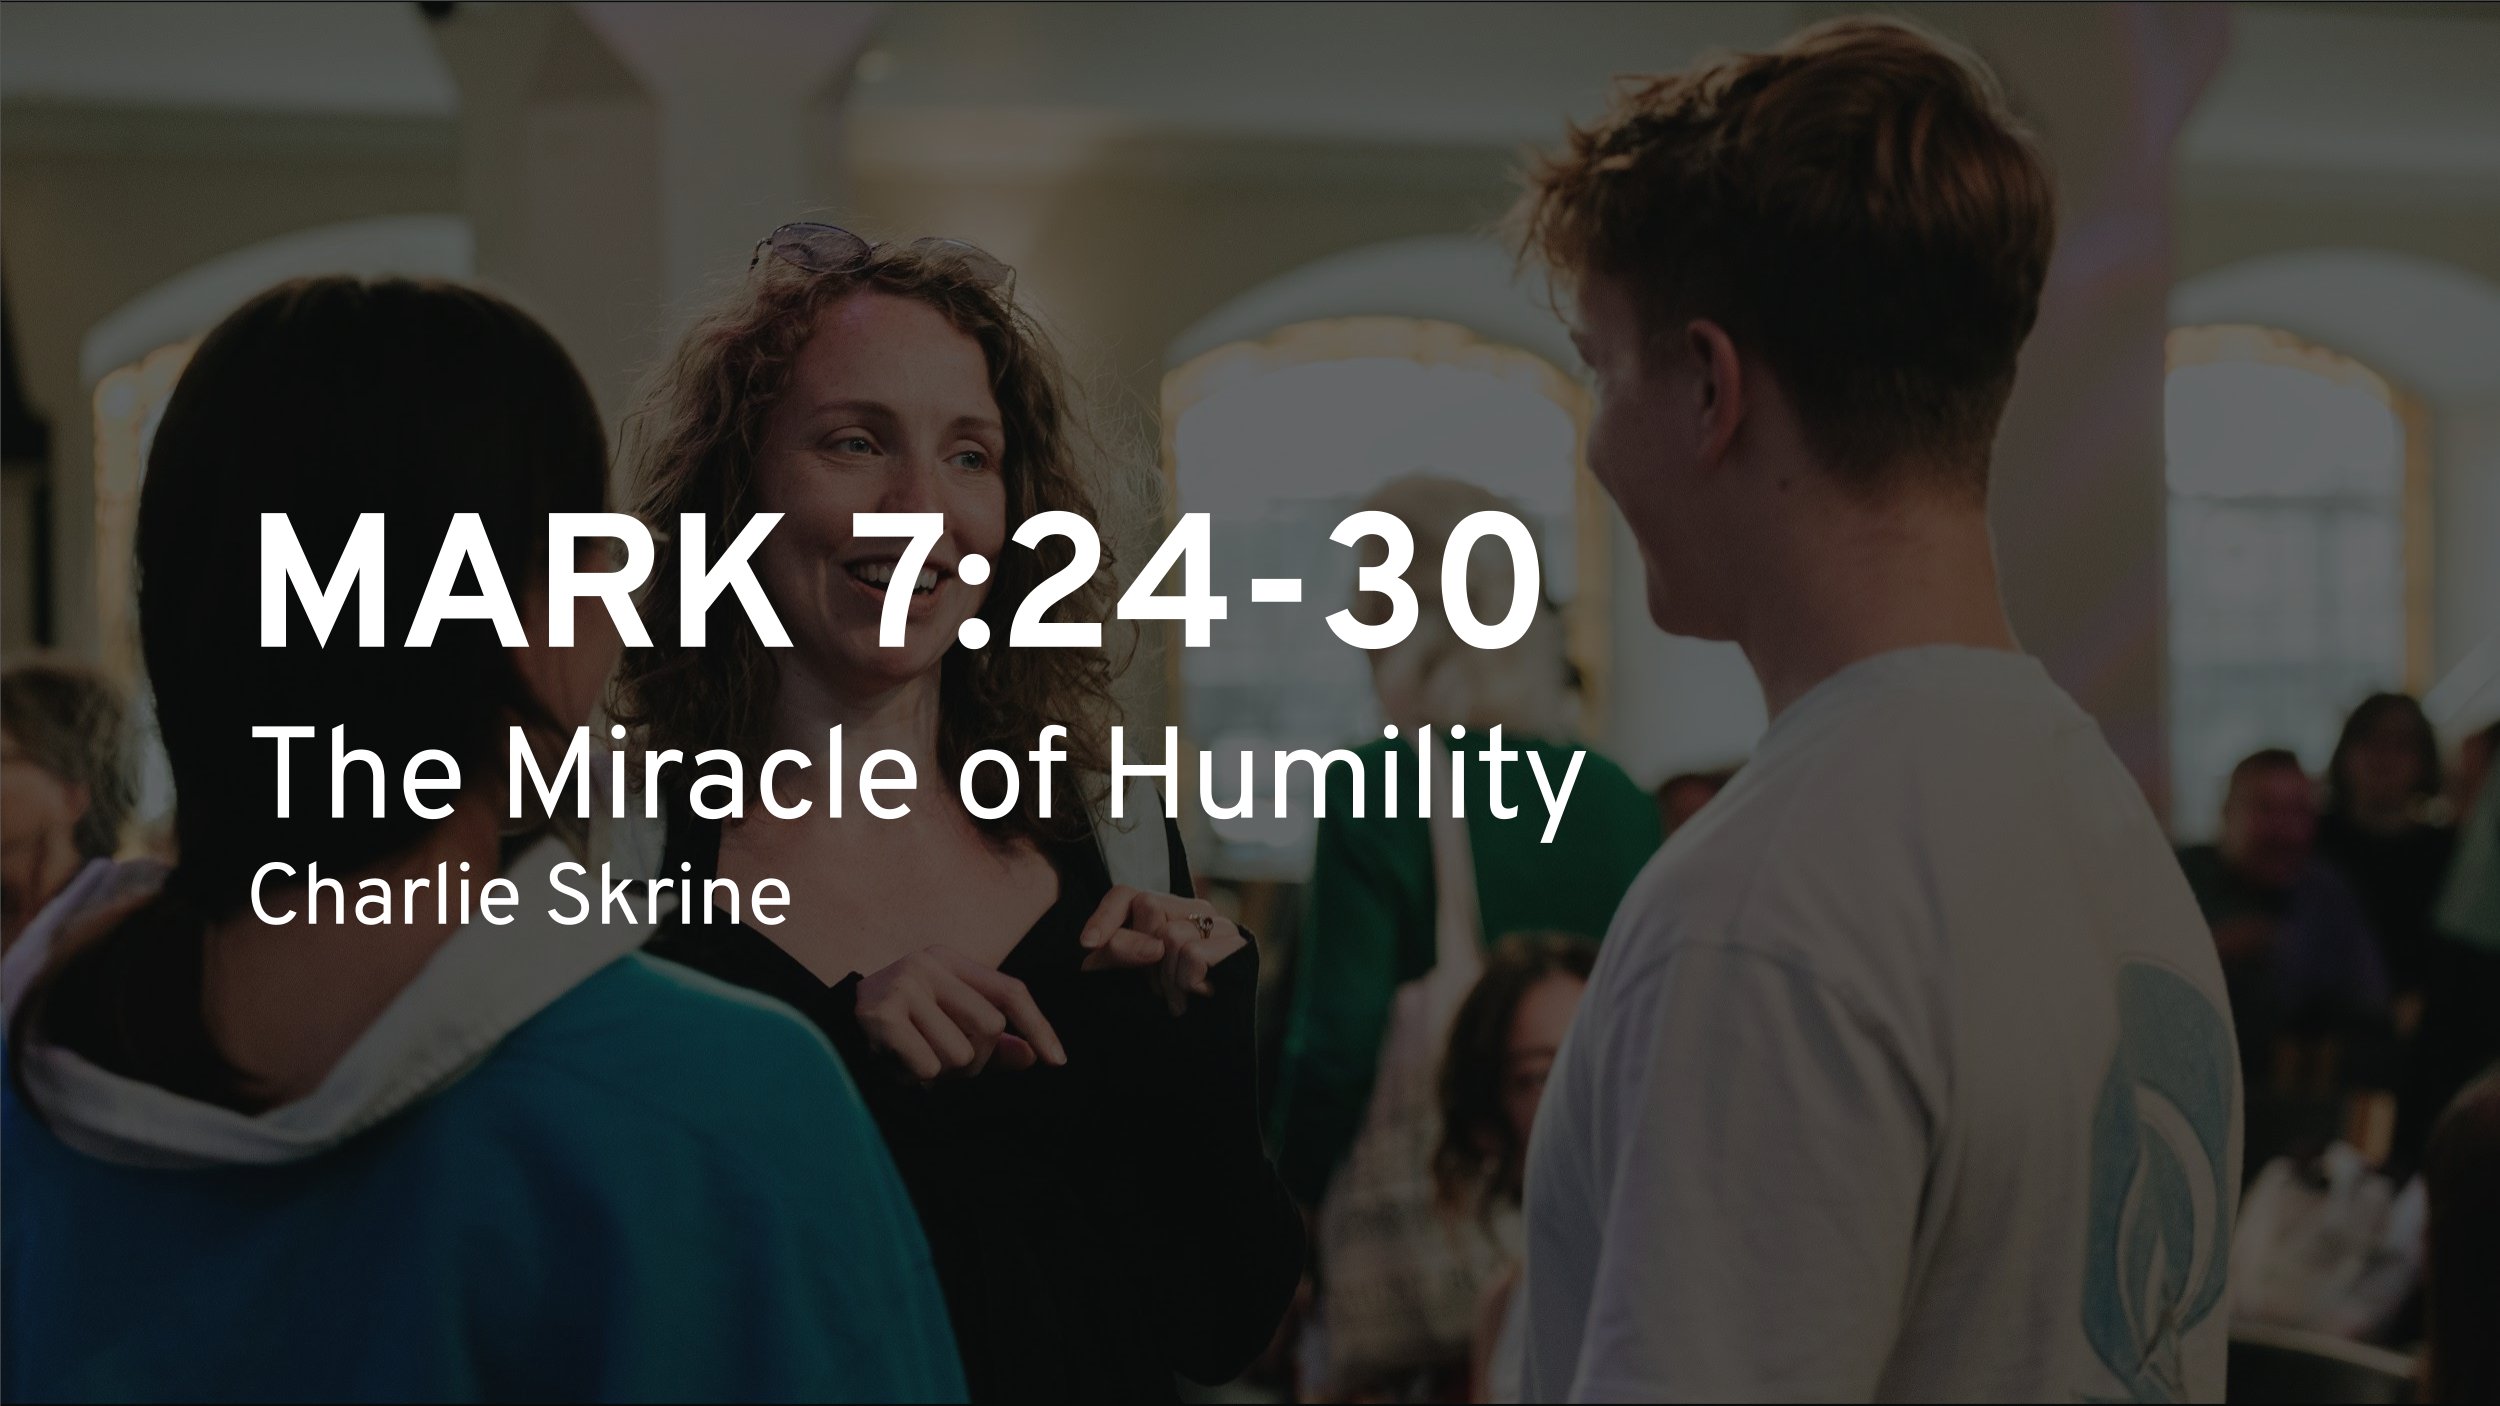 The Miracle of Humility